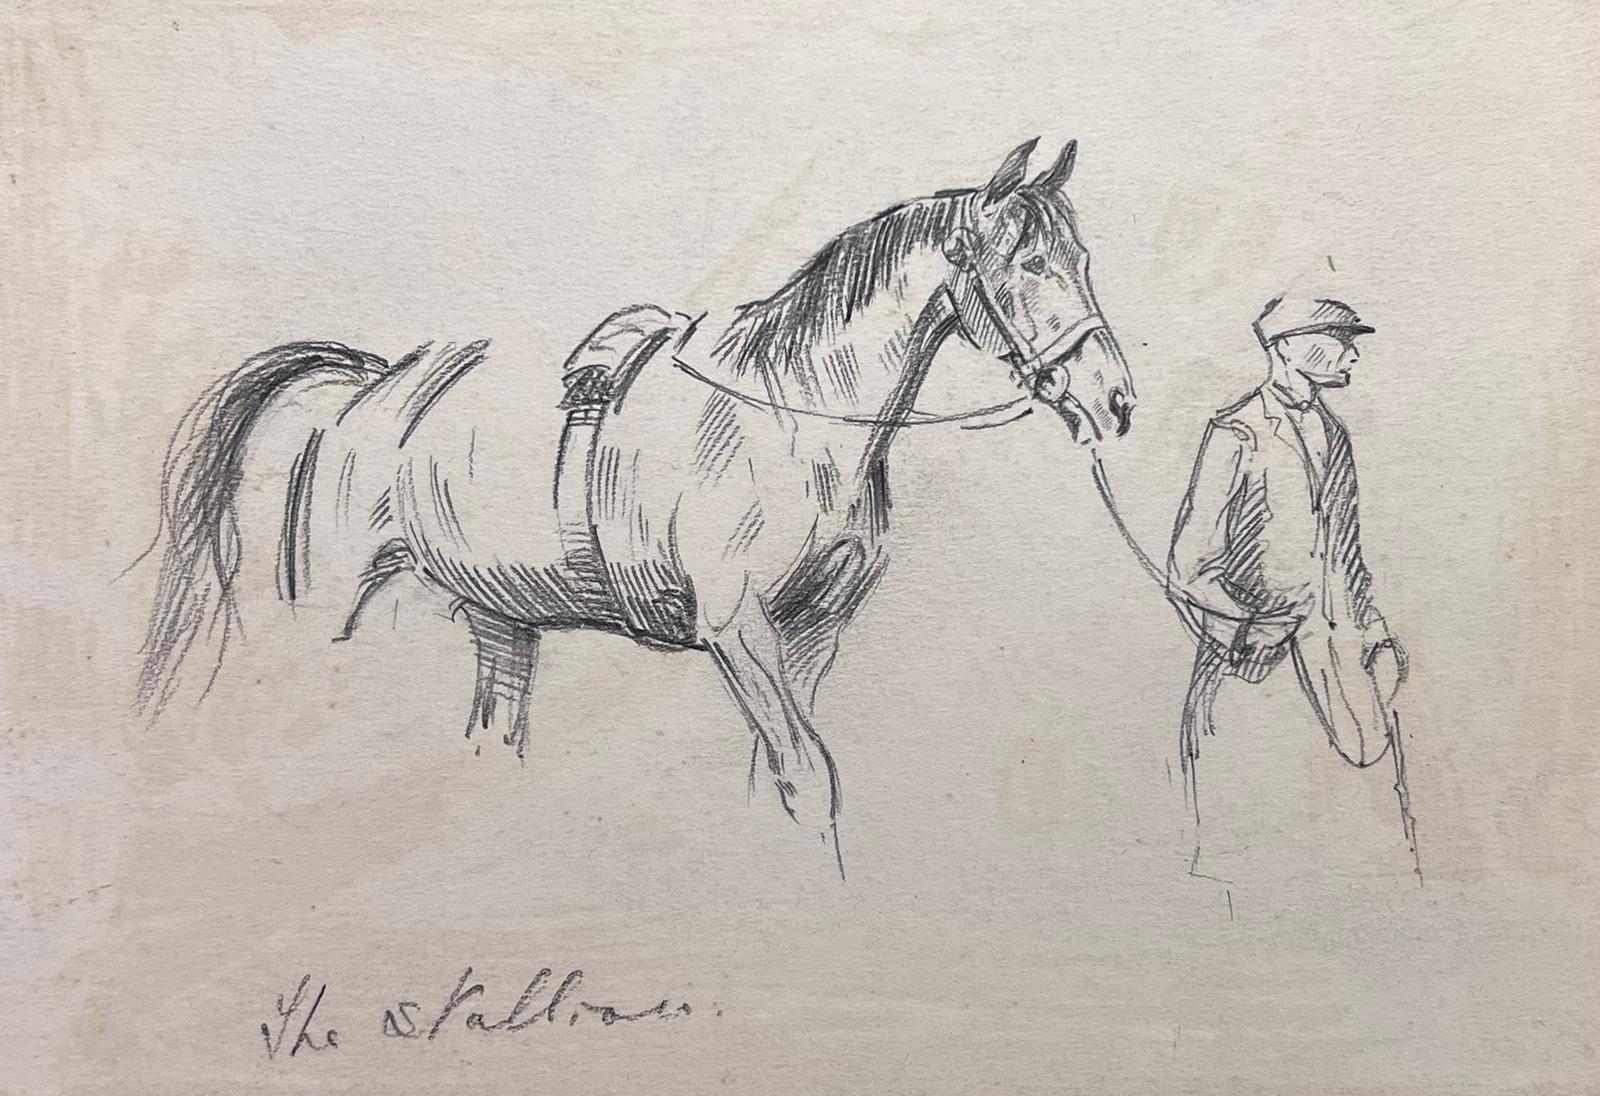 circle of Sir Alfred J. Munnings Animal Painting - 1930's British Sporting Art Equestrian Sketch Groom with Stallion Horse 